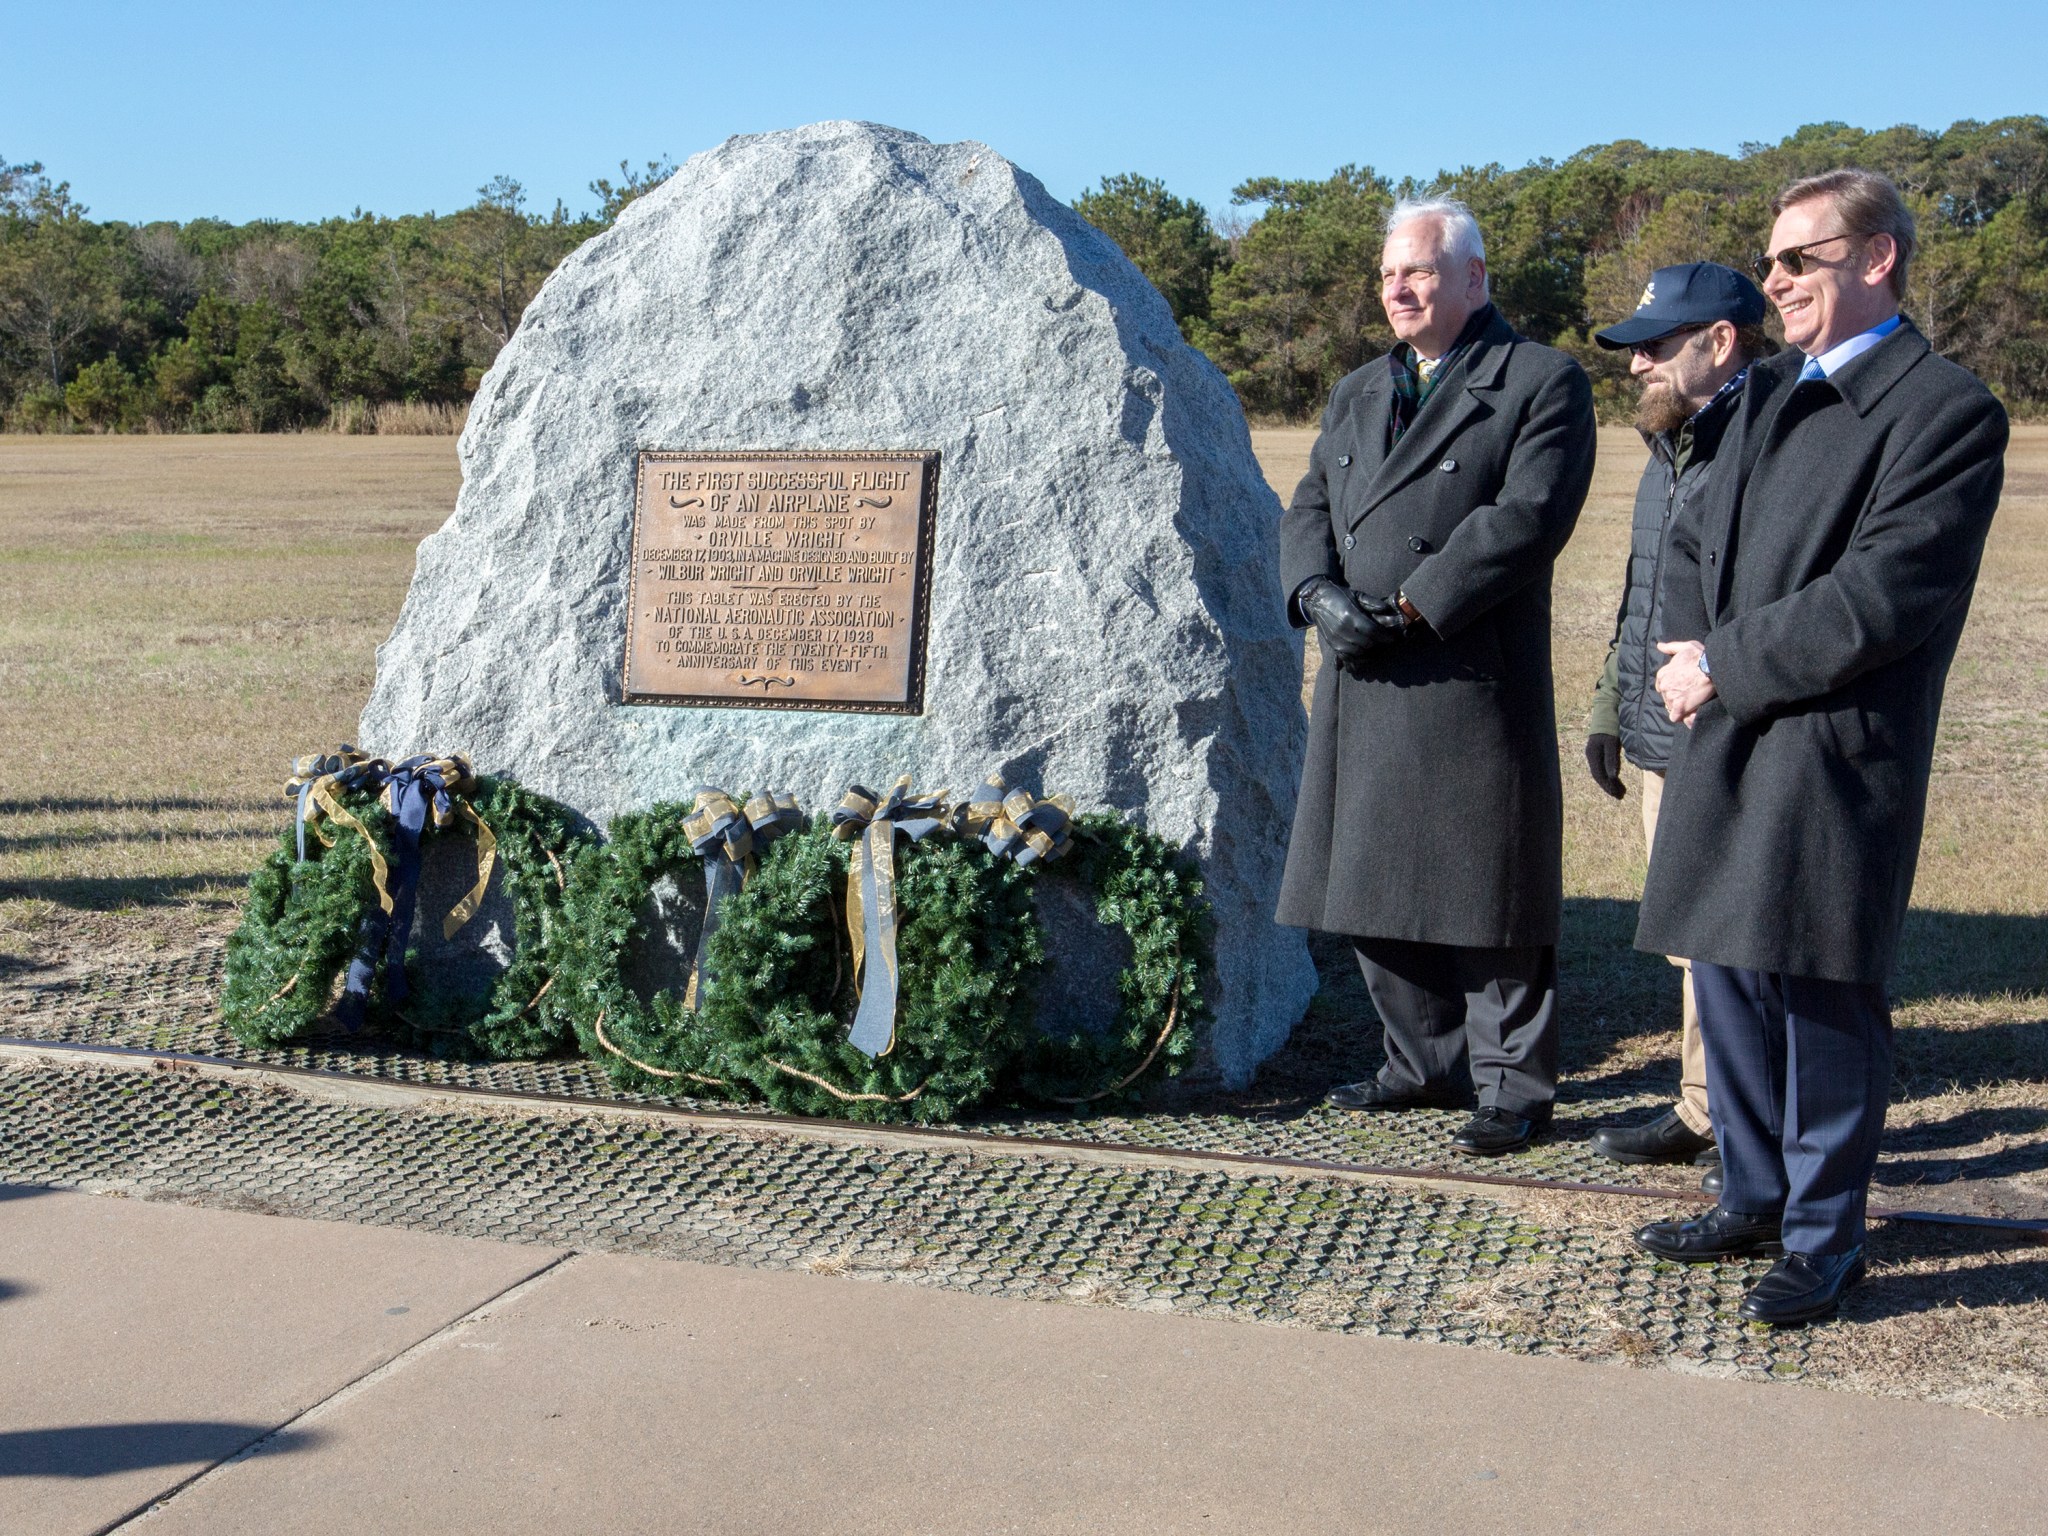 Descendants of the Wright Brothers' family stand next to a marker adorned with wreaths honoring the Wright Brothers.